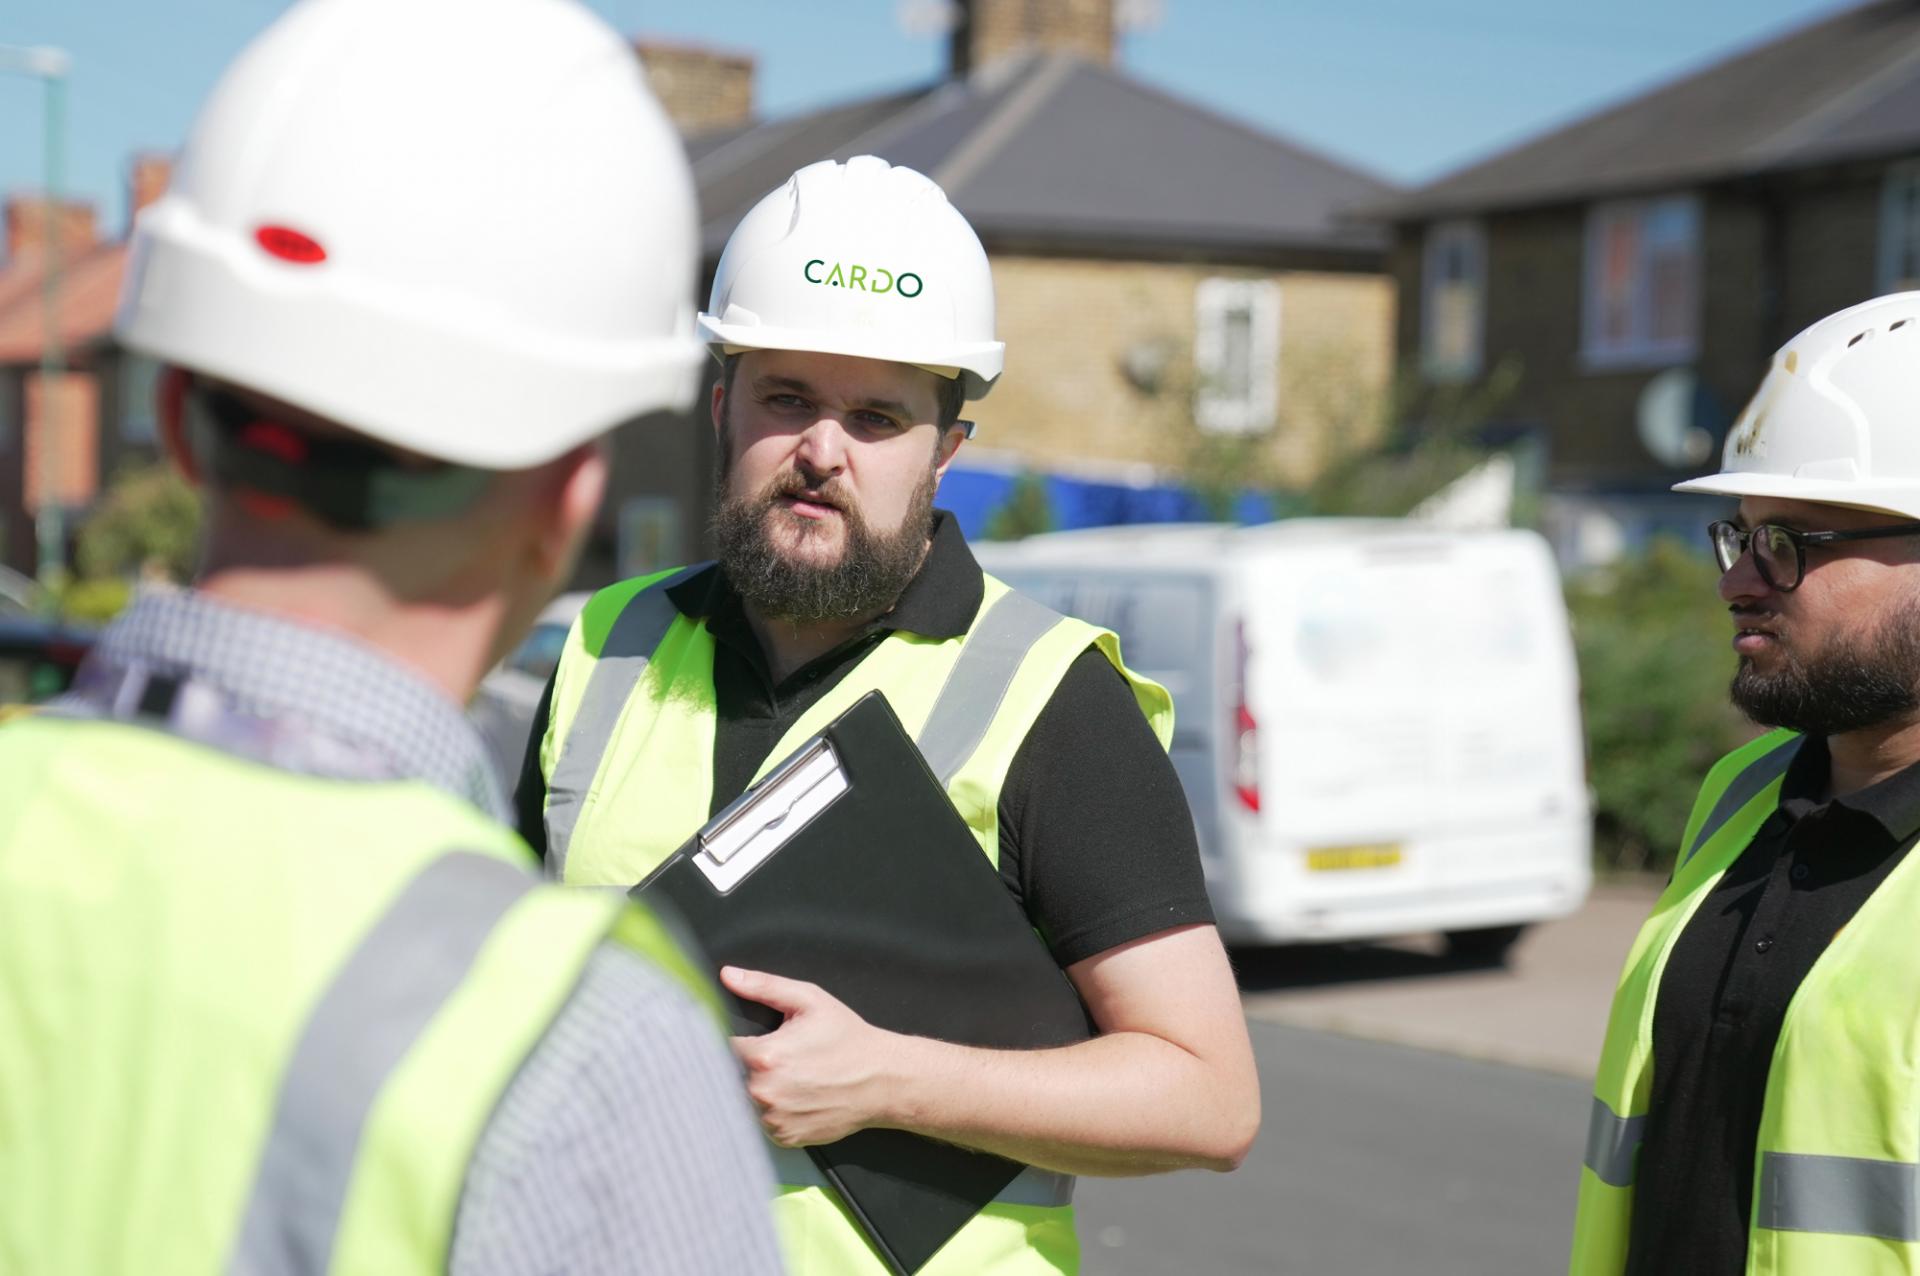 Building maintenance contractor hits £170m revenue with latest deal